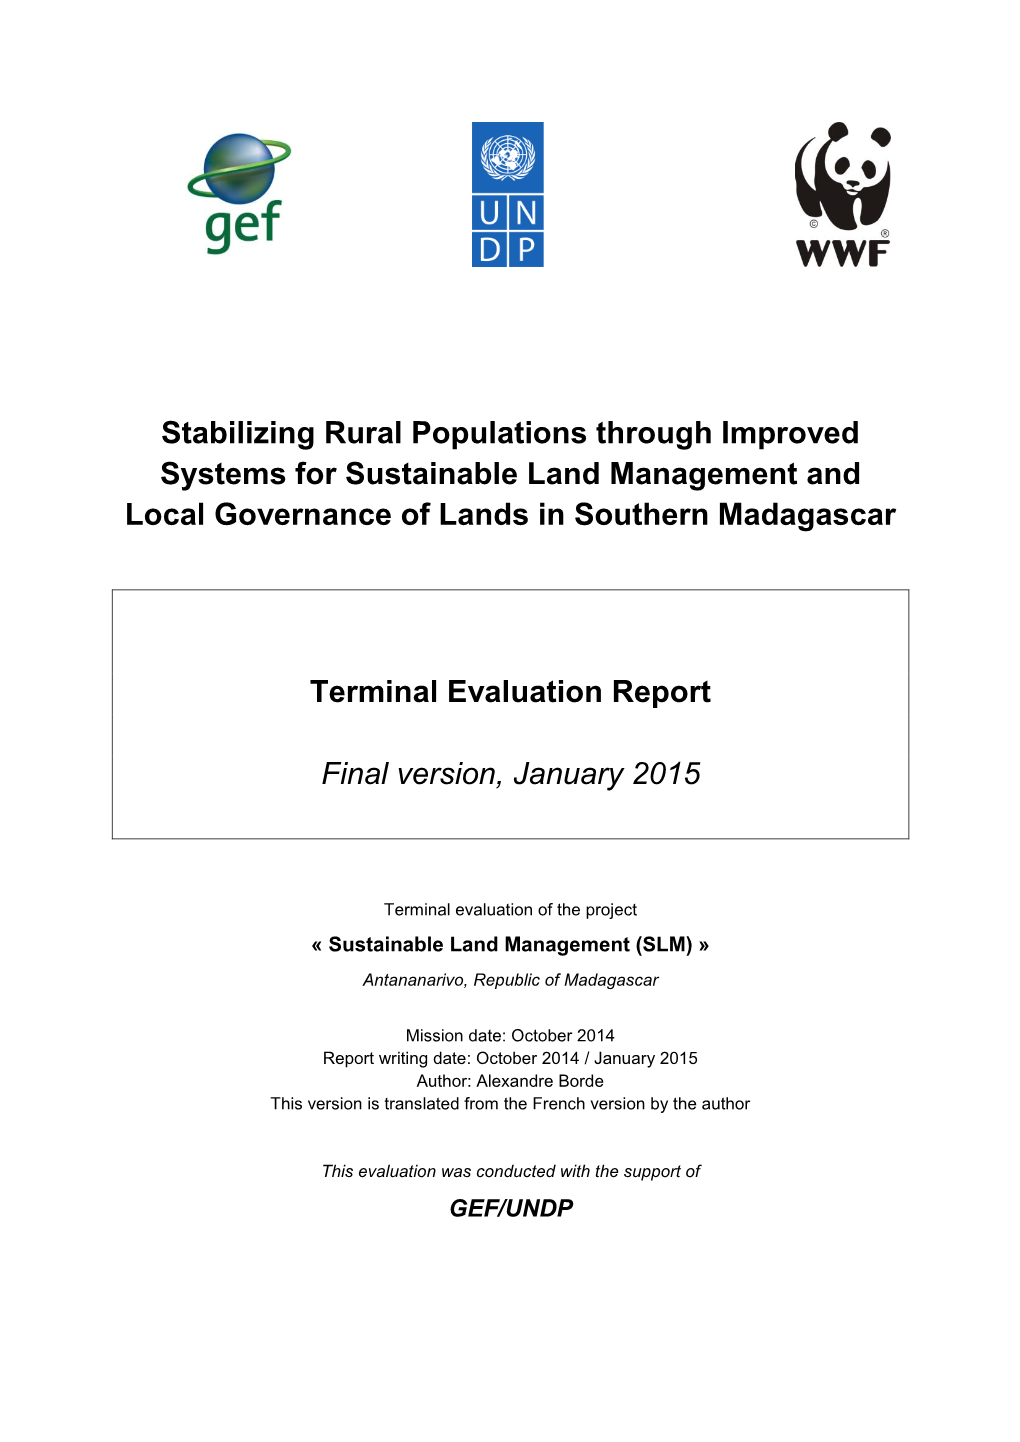 Stabilizing Rural Populations Through Improved Systems for Sustainable Land Management and Local Governance of Lands in Southern Madagascar